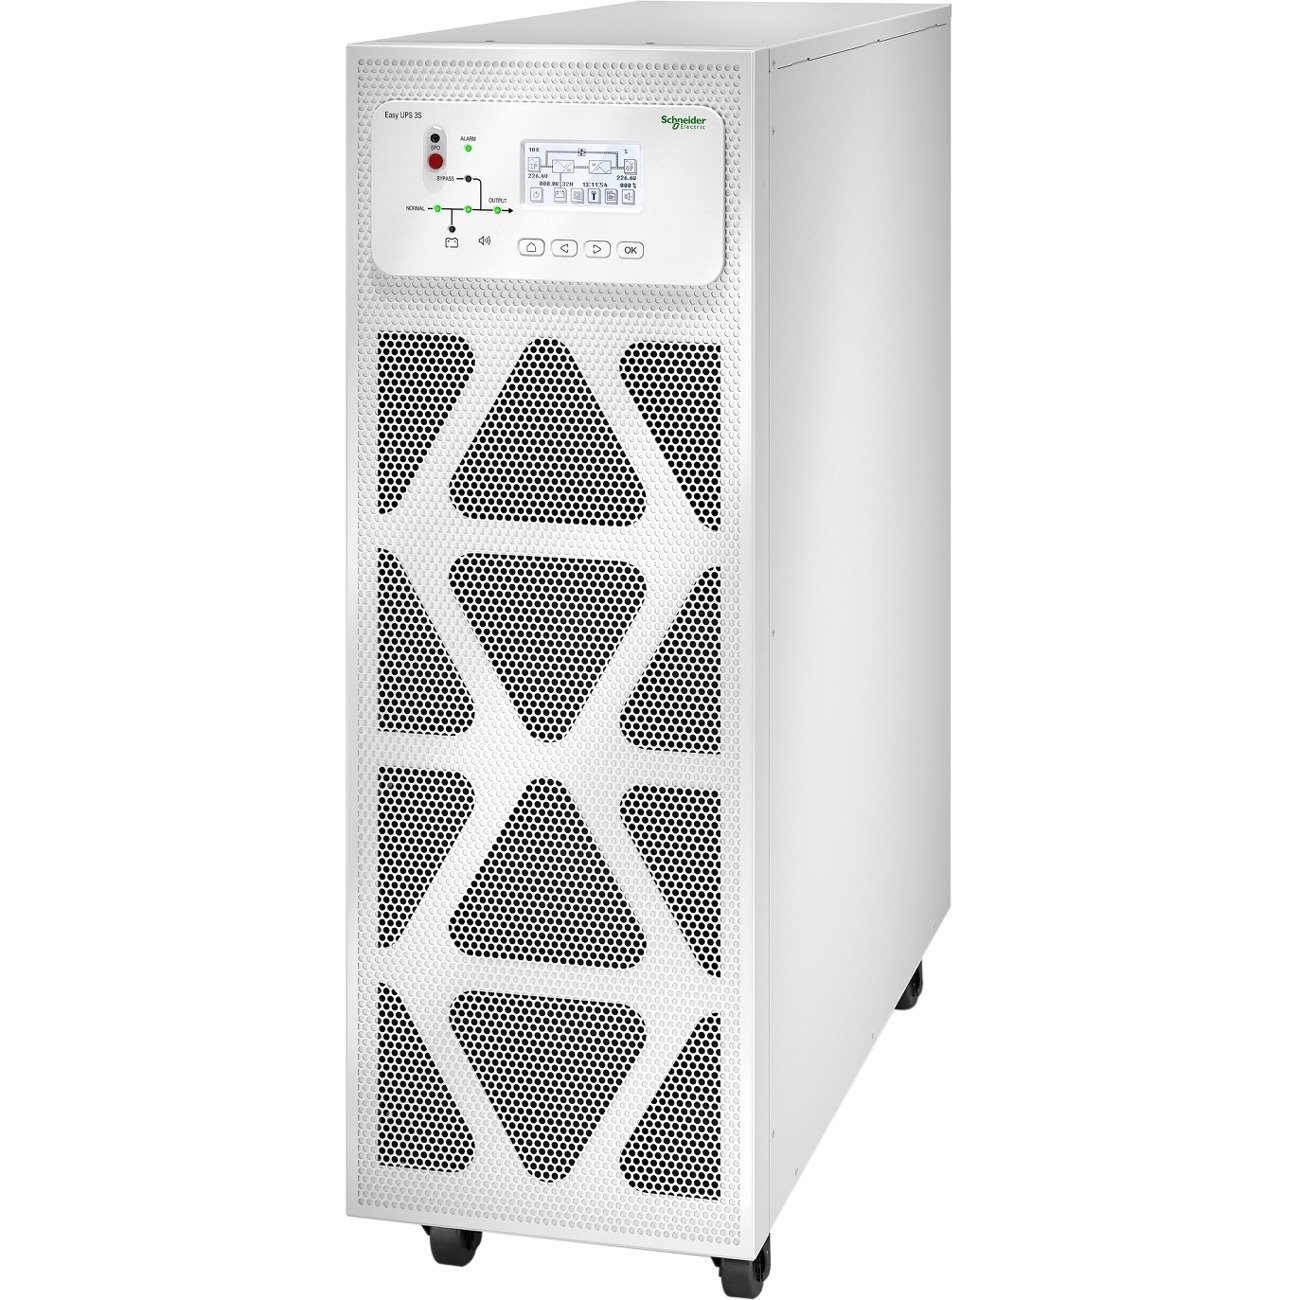 APC by Schneider Electric Easy UPS 3S Double Conversion Online UPS - 20 kVA - Three Phase